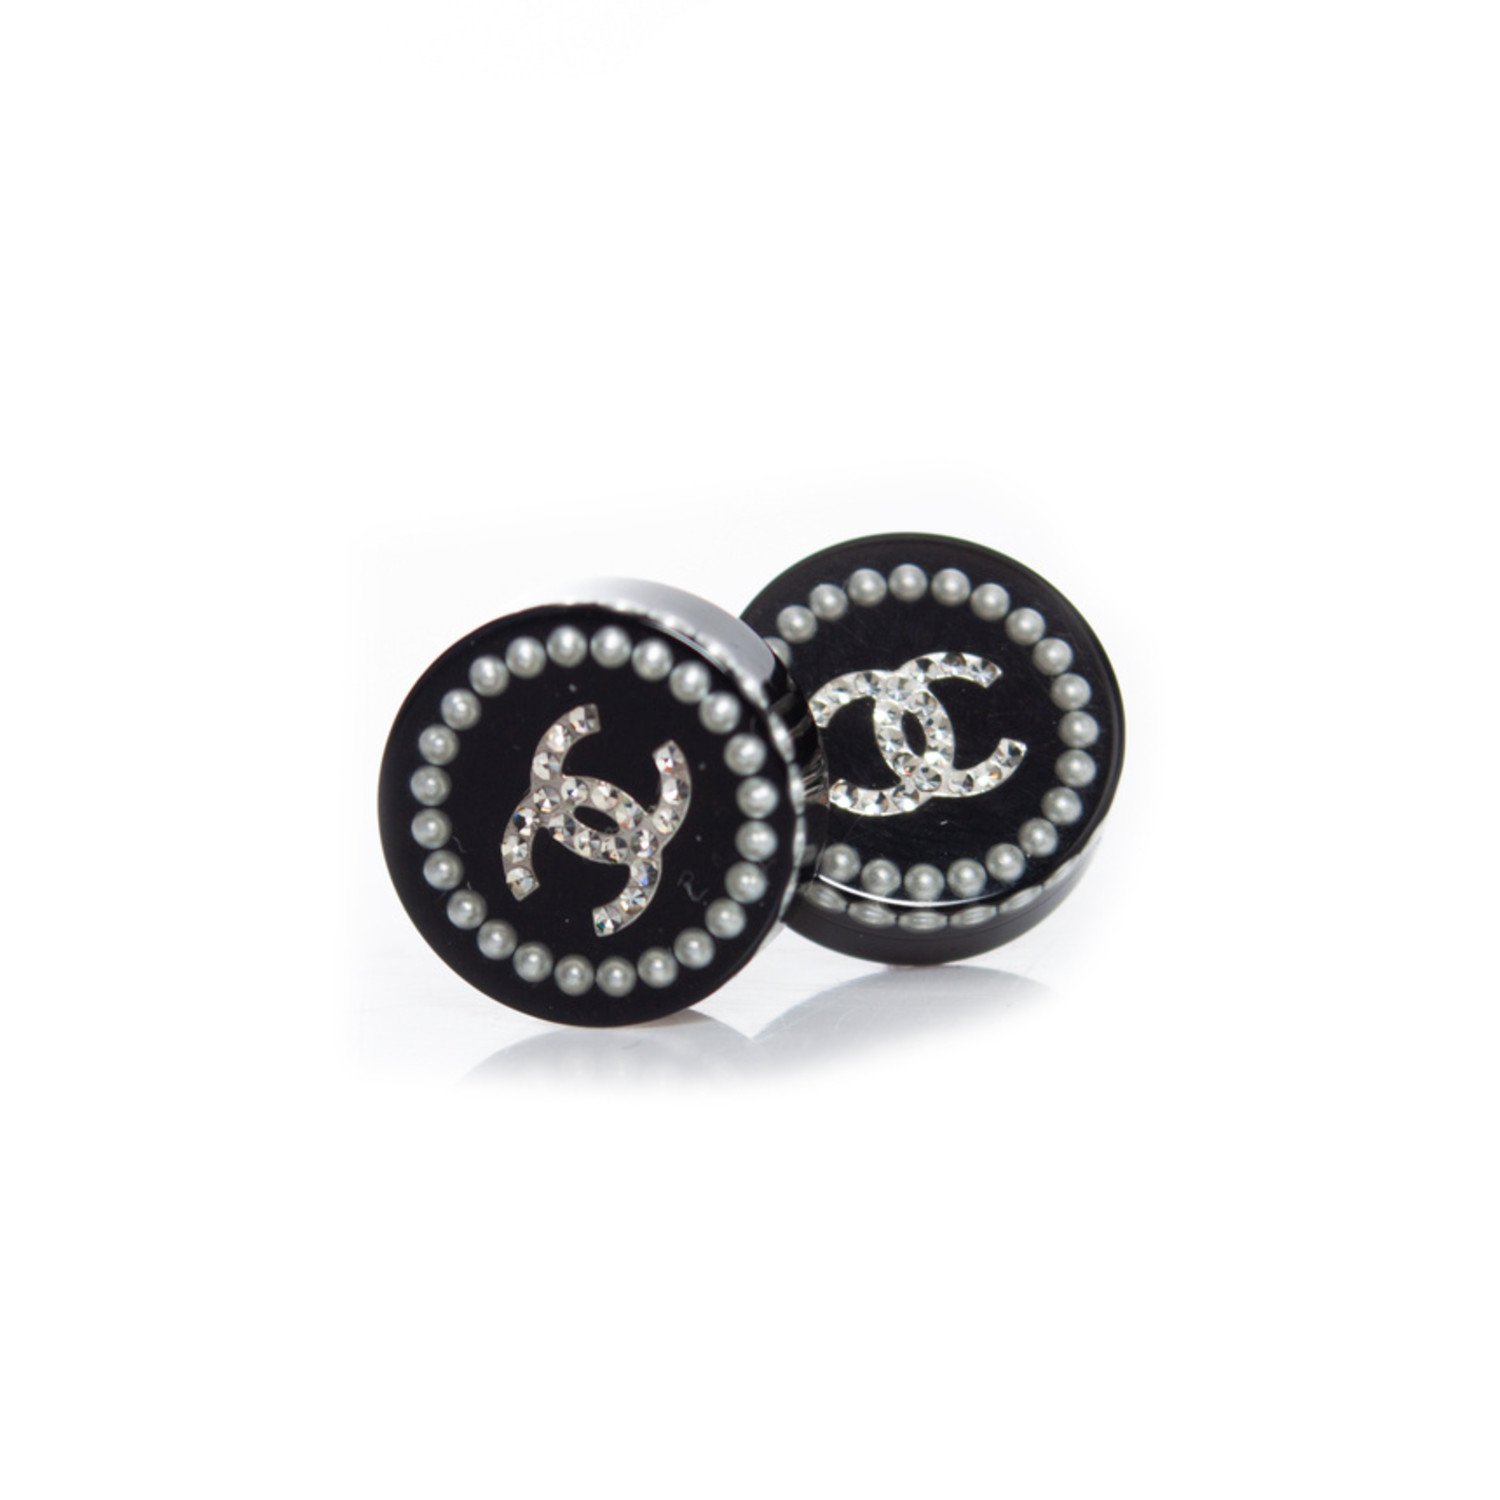 Chanel, Round studded pearl and rhinestone earrings - Unique Designer Pieces